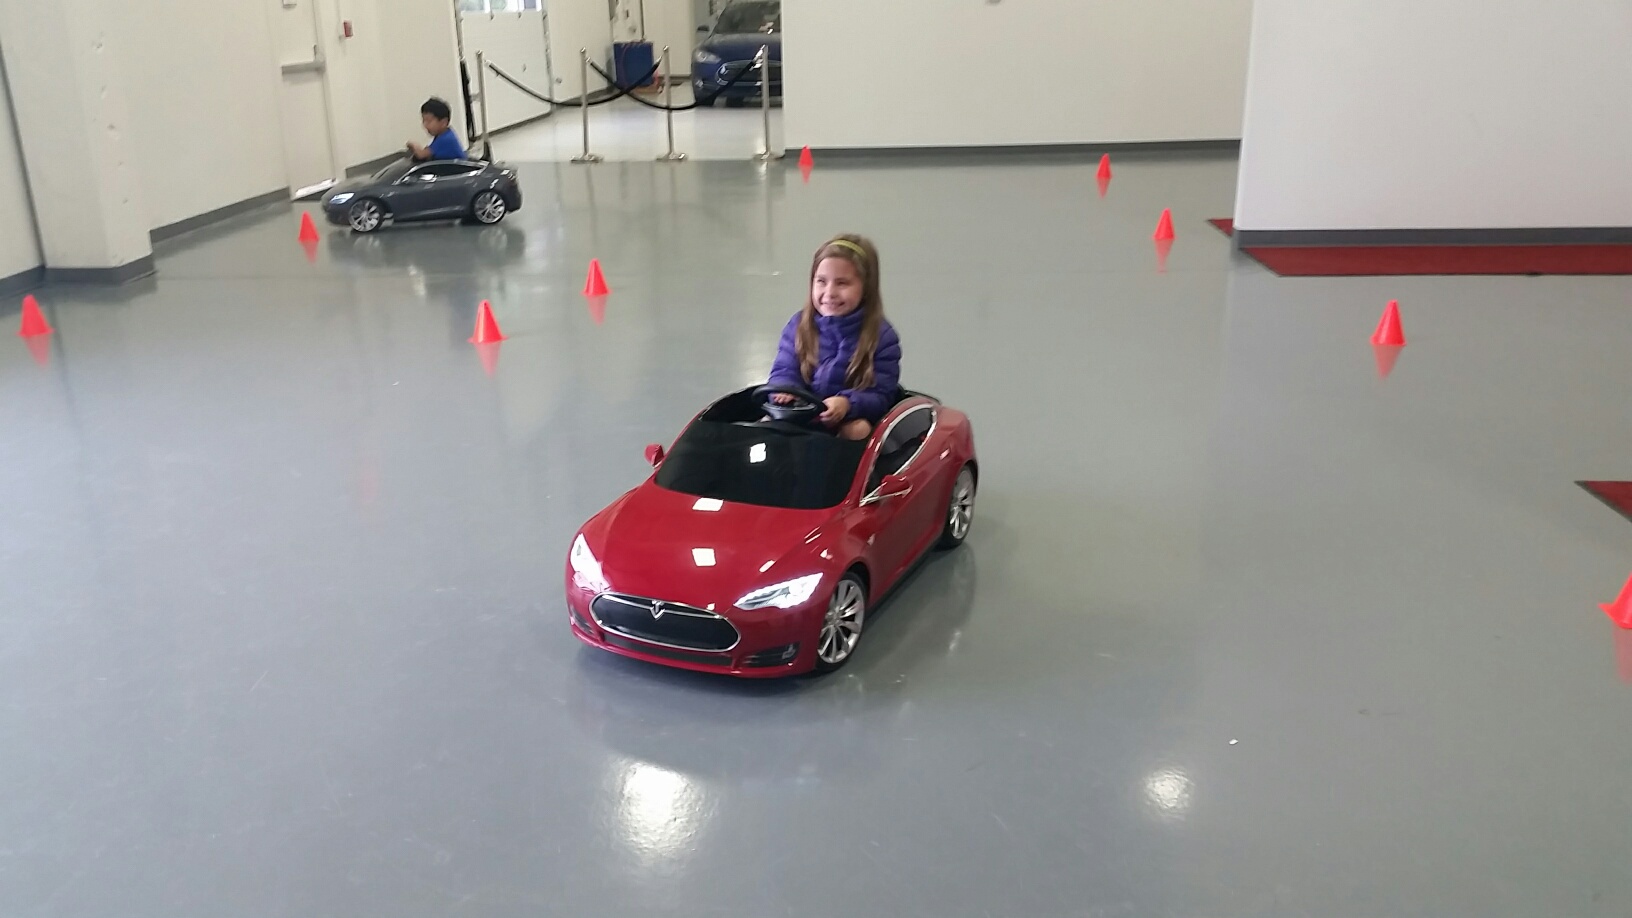 Kids take the Tesla Model S for Kids for a “road test” at Tesla Motors Tyco Road in Vienna, Va. on Sunday, May 22, 2016. (WTOP/Kathy Stewart)